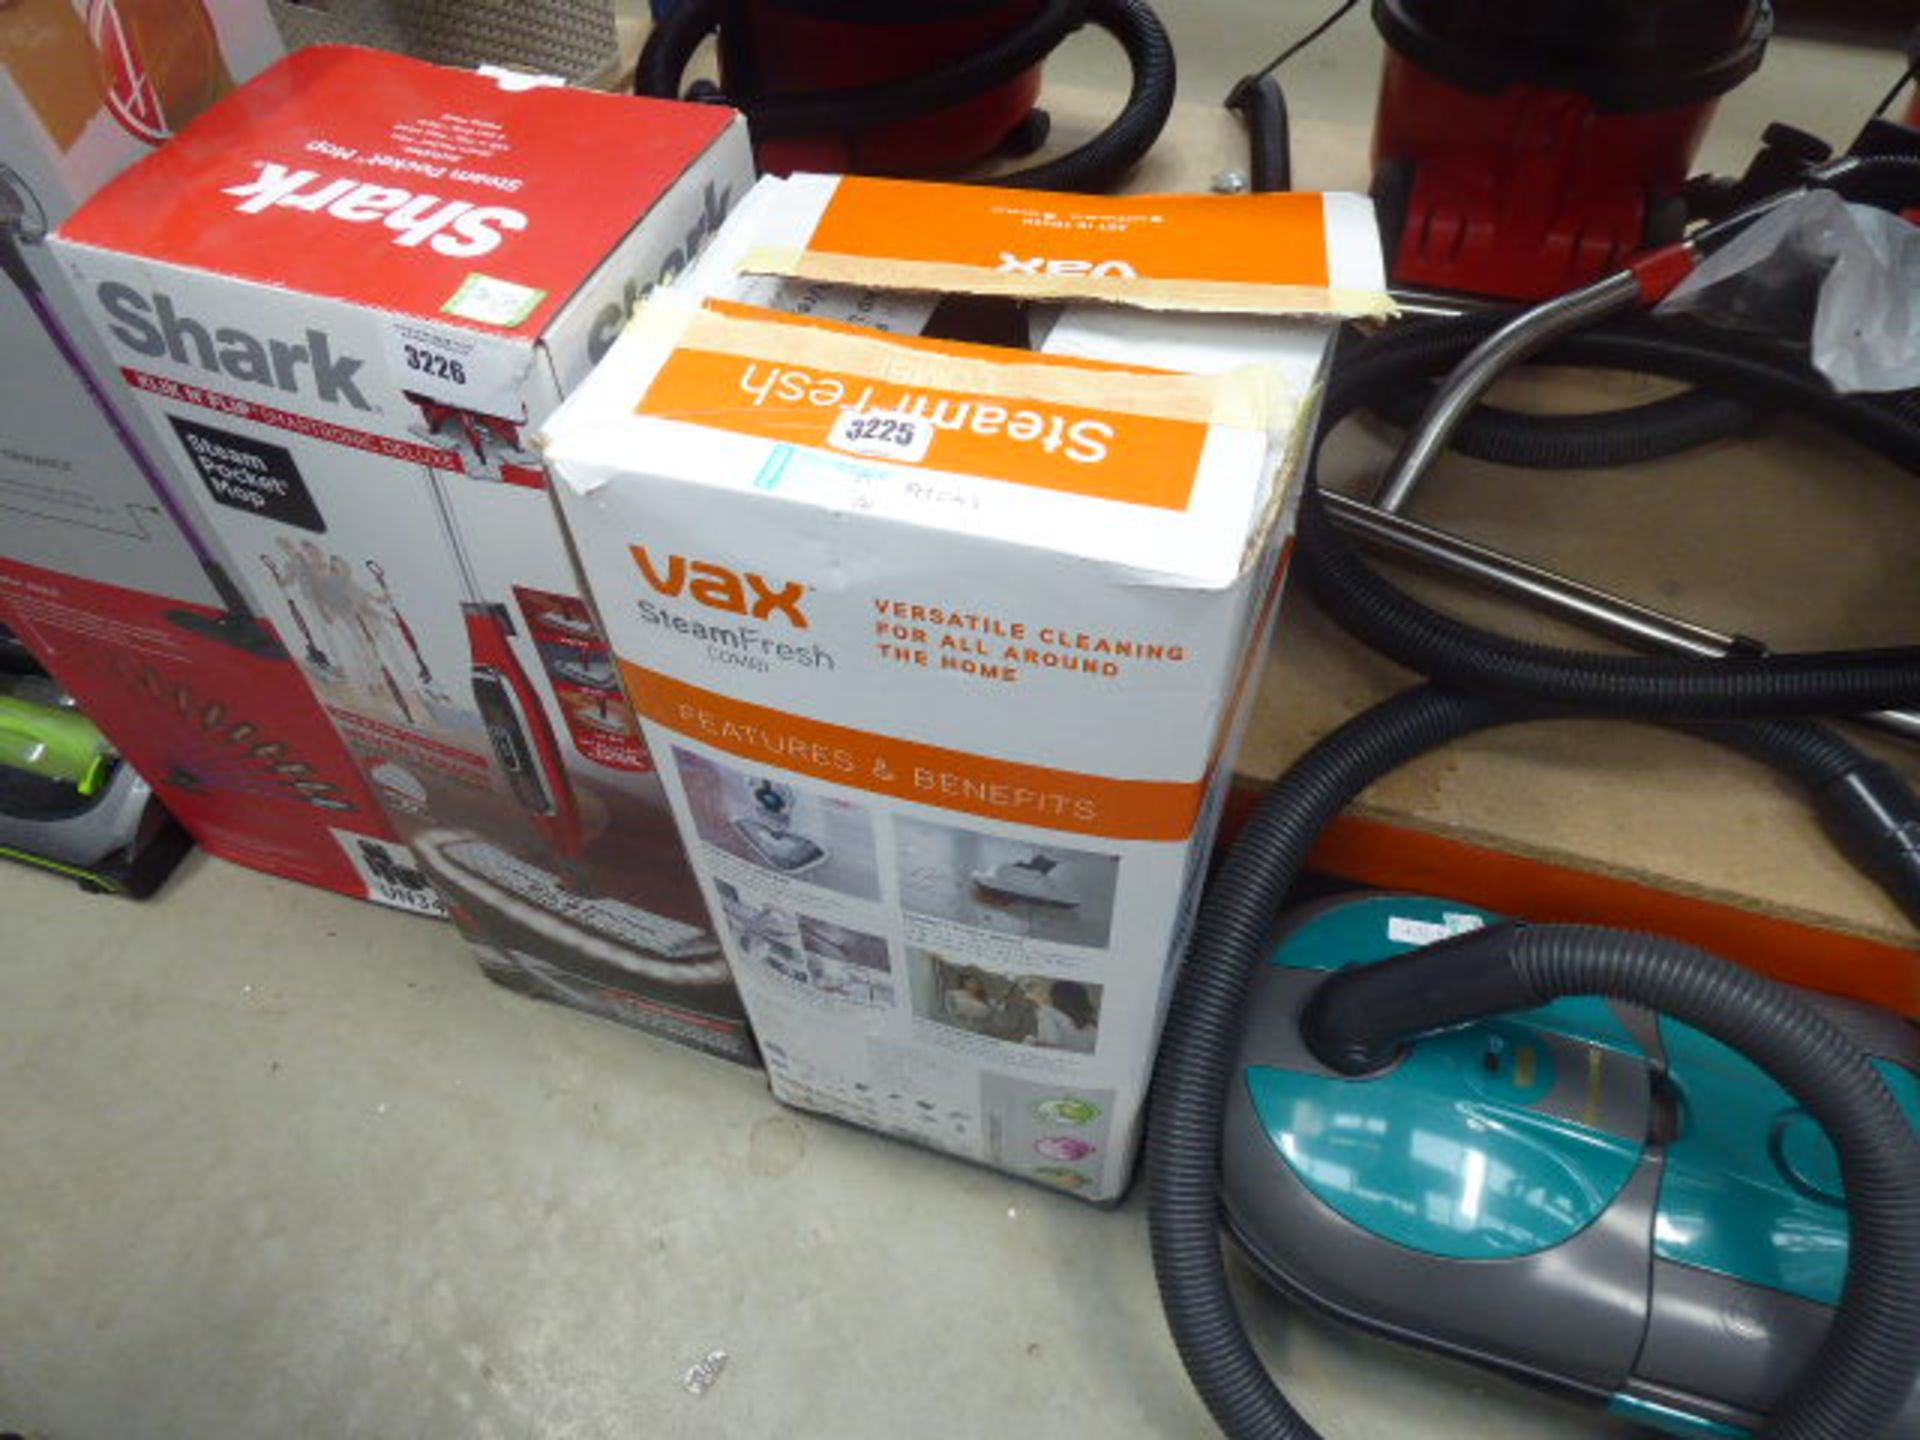 3183 Upright Vax floor cleaner with box